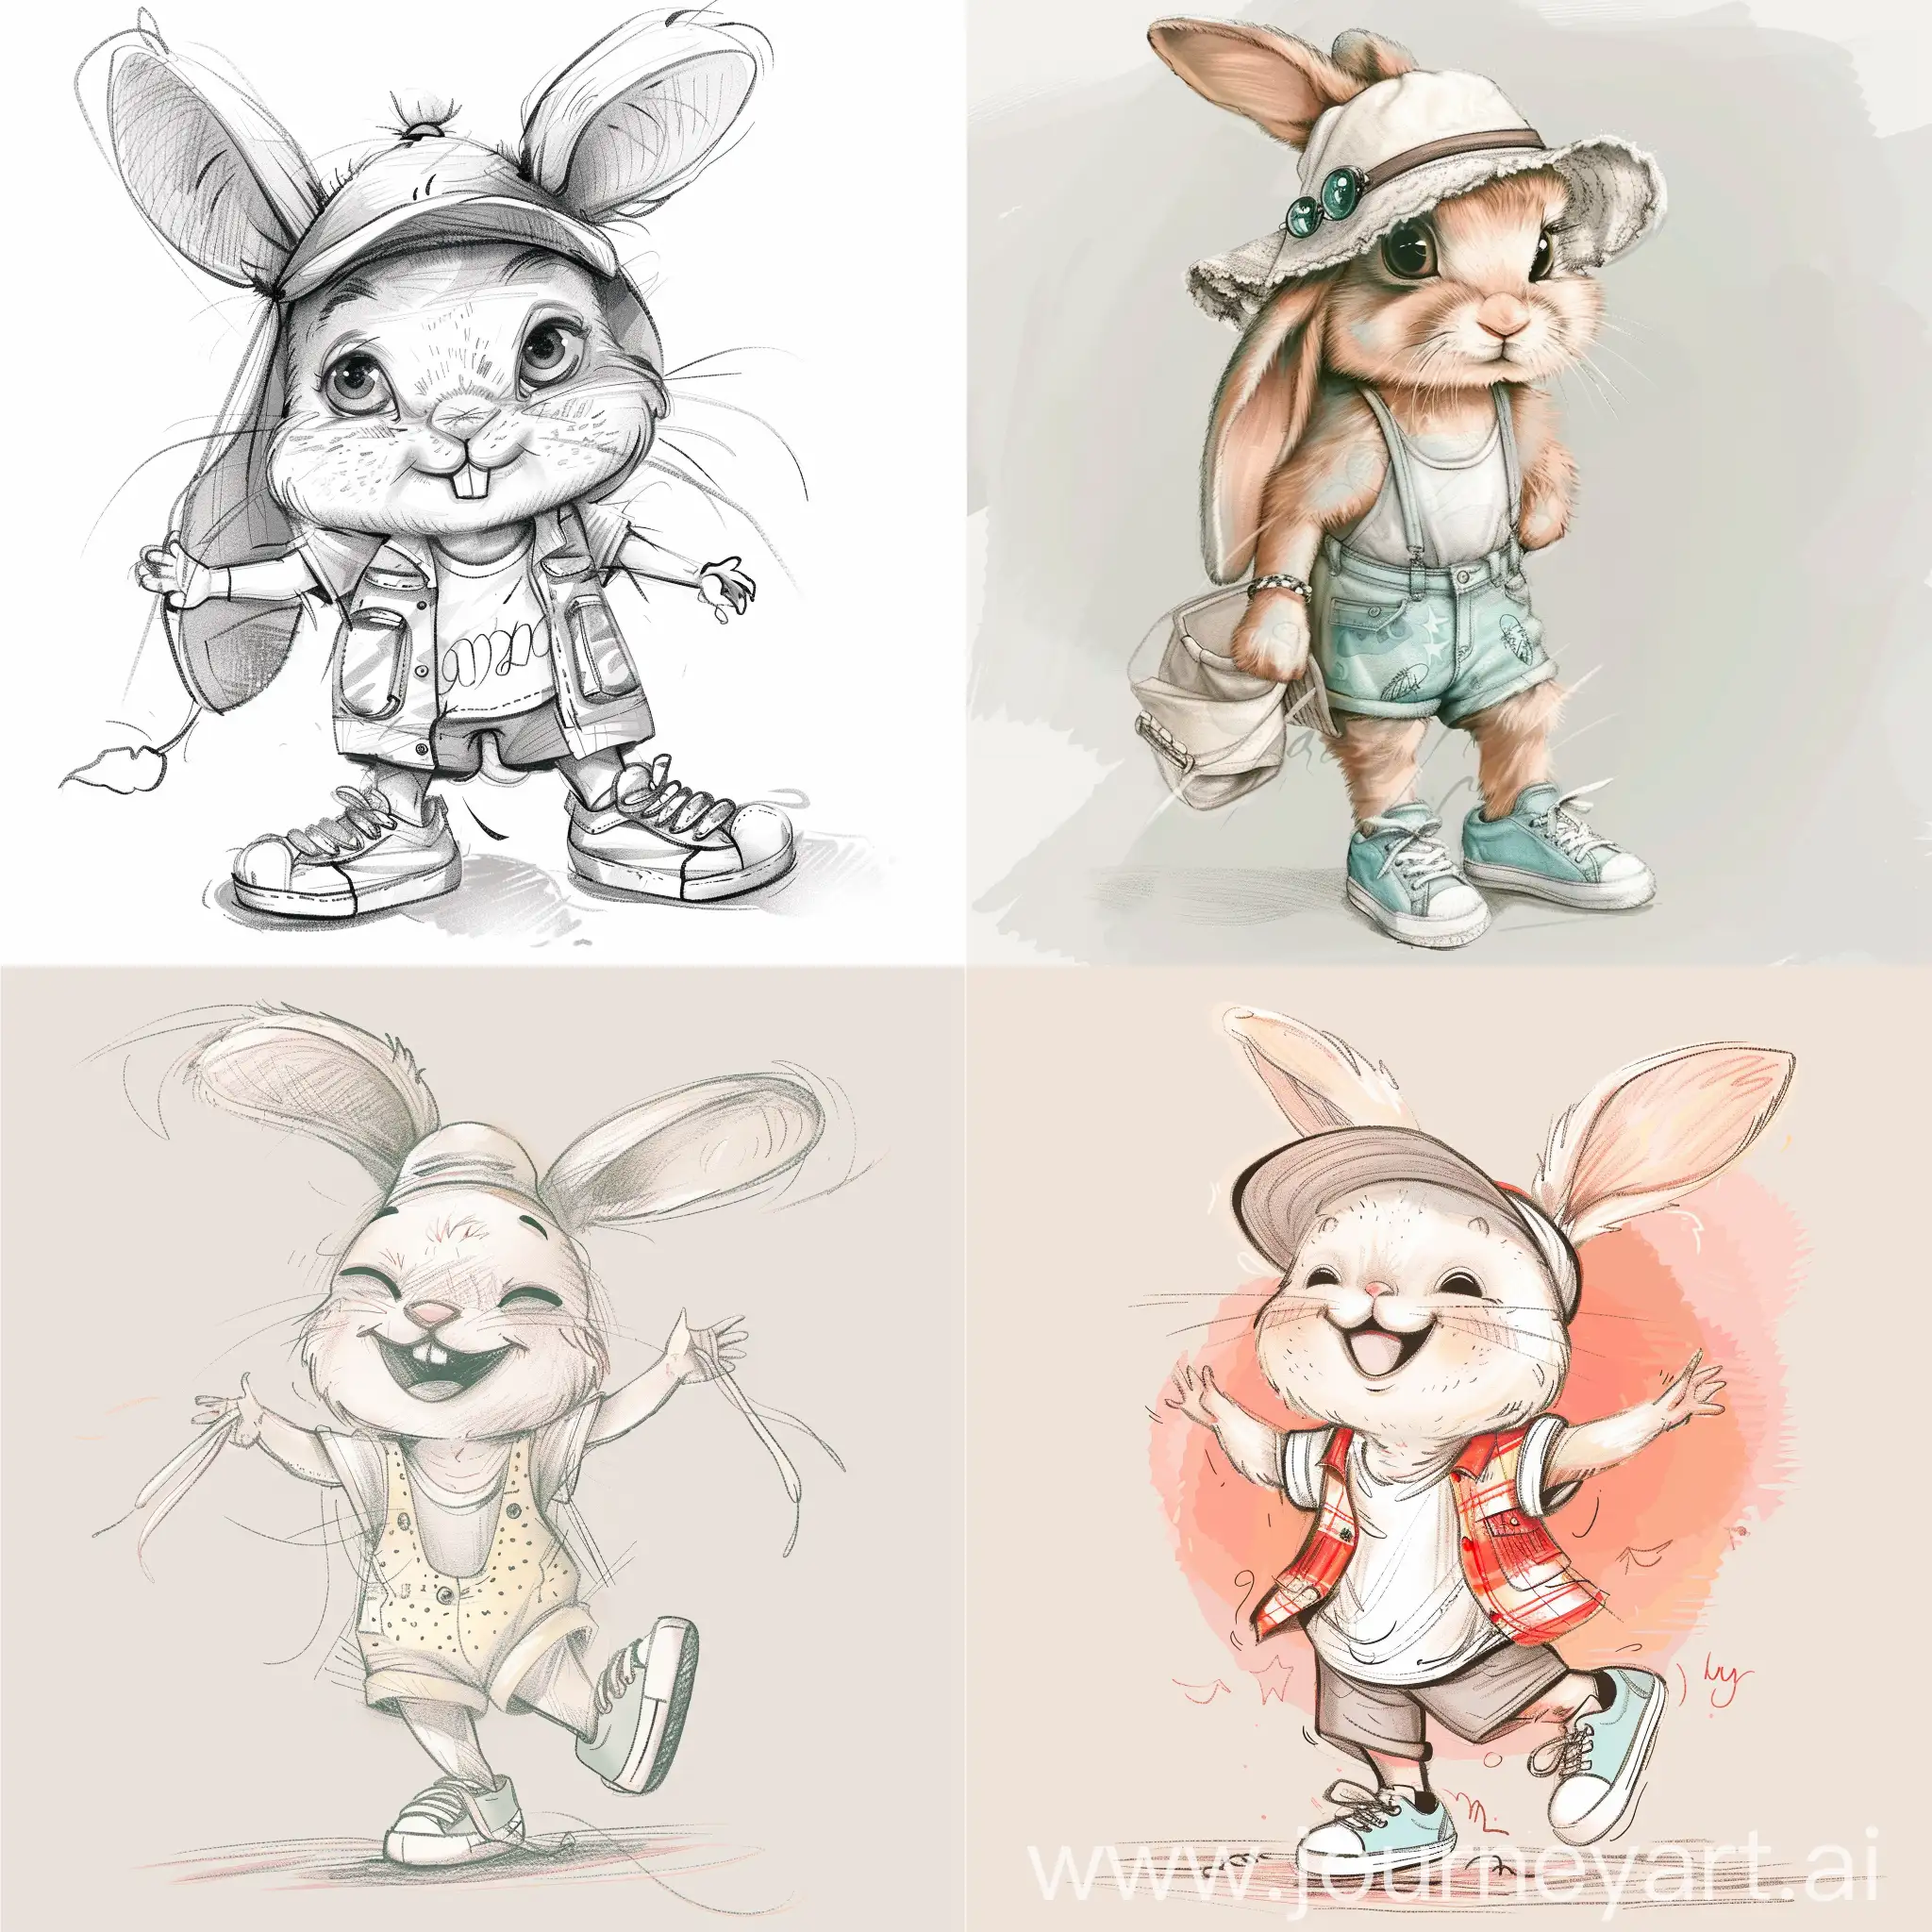 Cheerful-Bunny-Enjoying-Summer-in-Stylish-Outfit-and-Sneakers